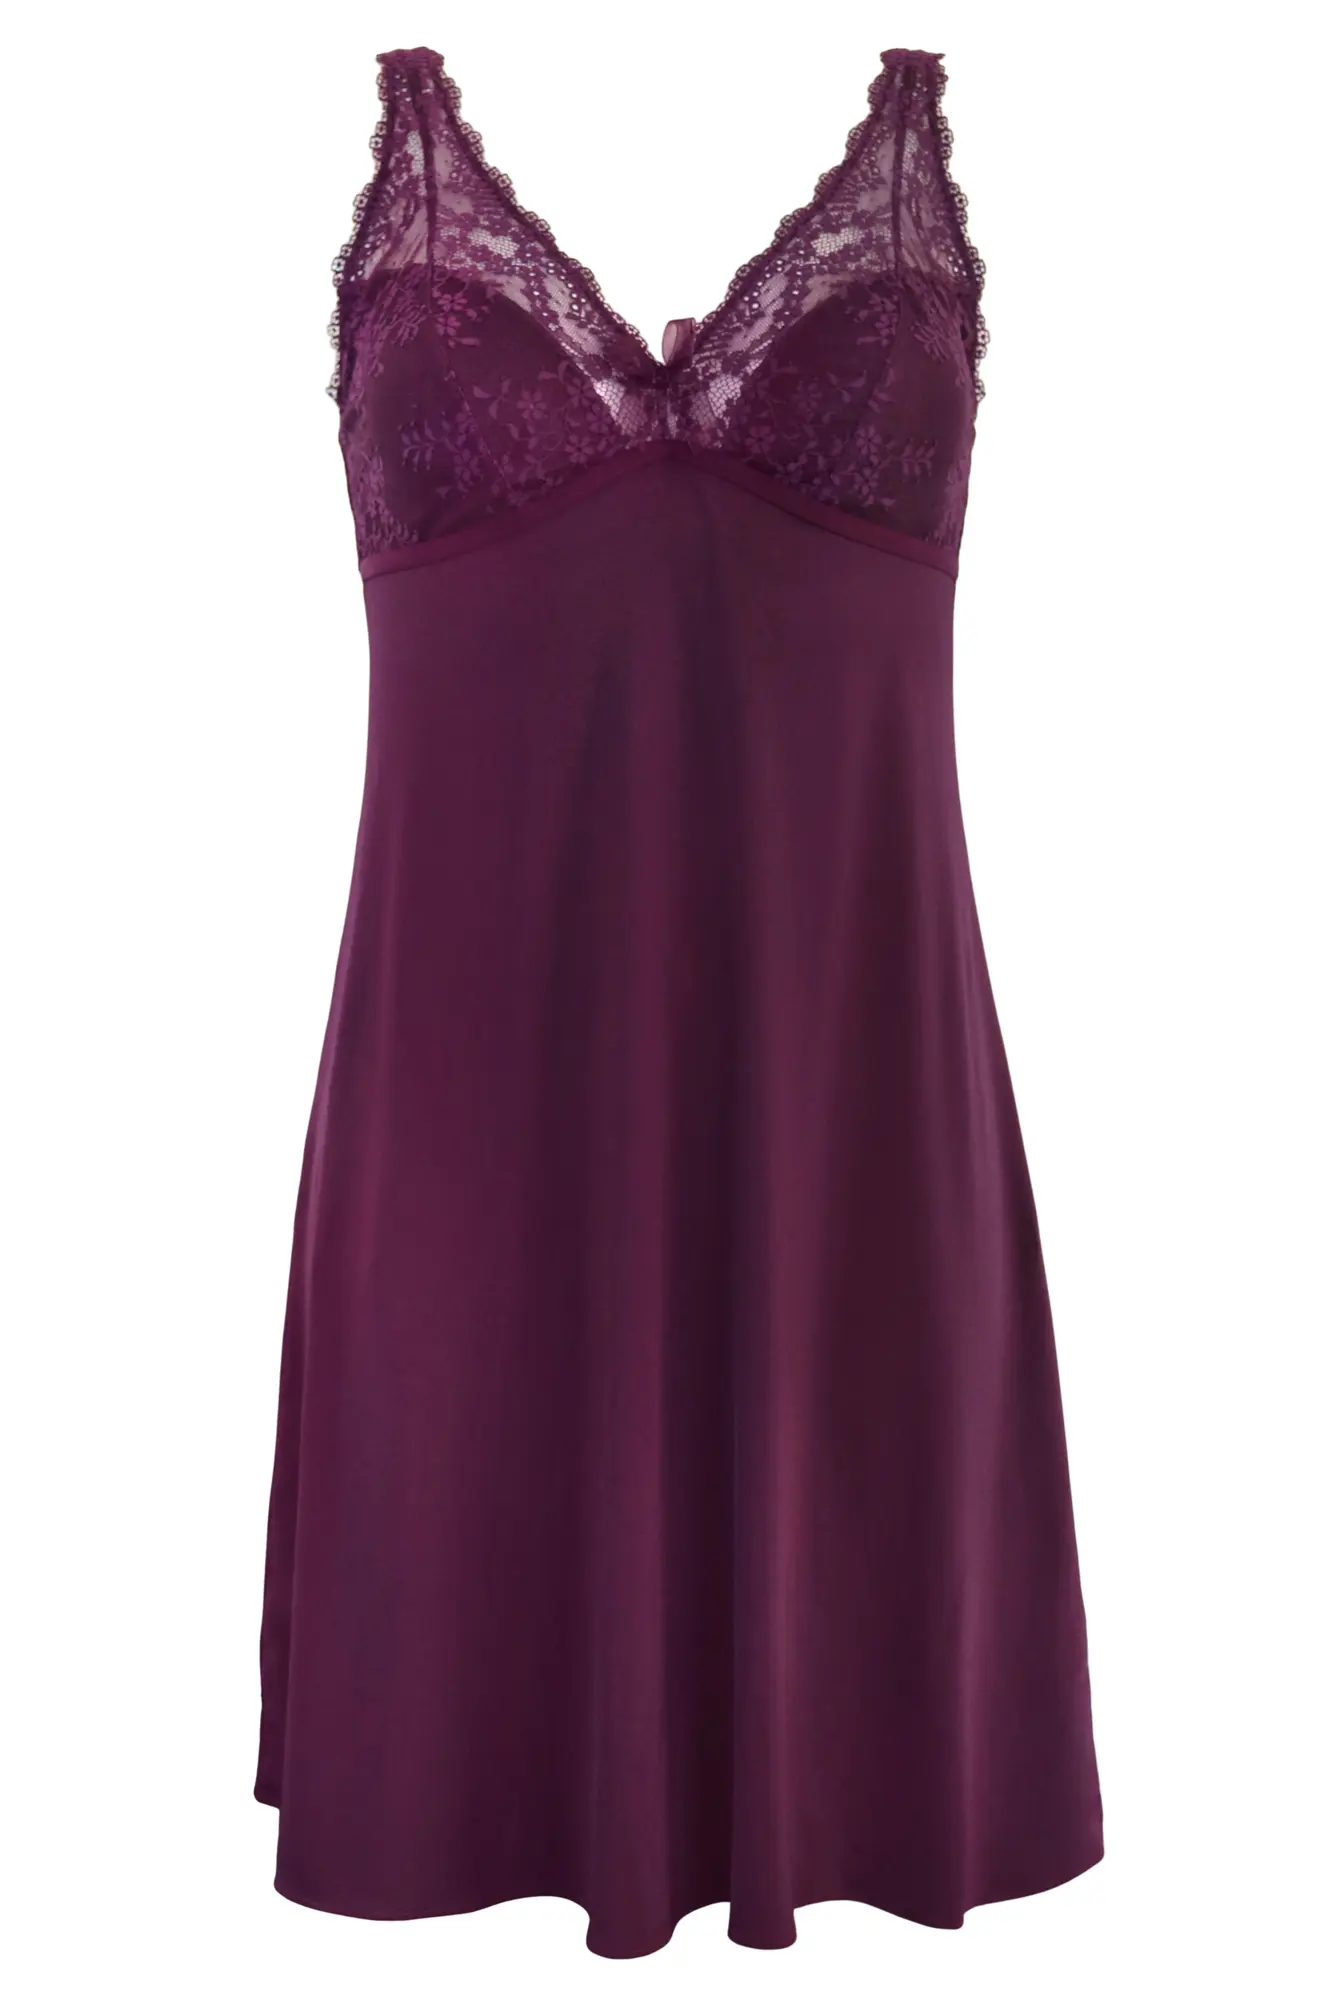 Flora Luxe Lace Chemise in Blackberry | Pour Moi